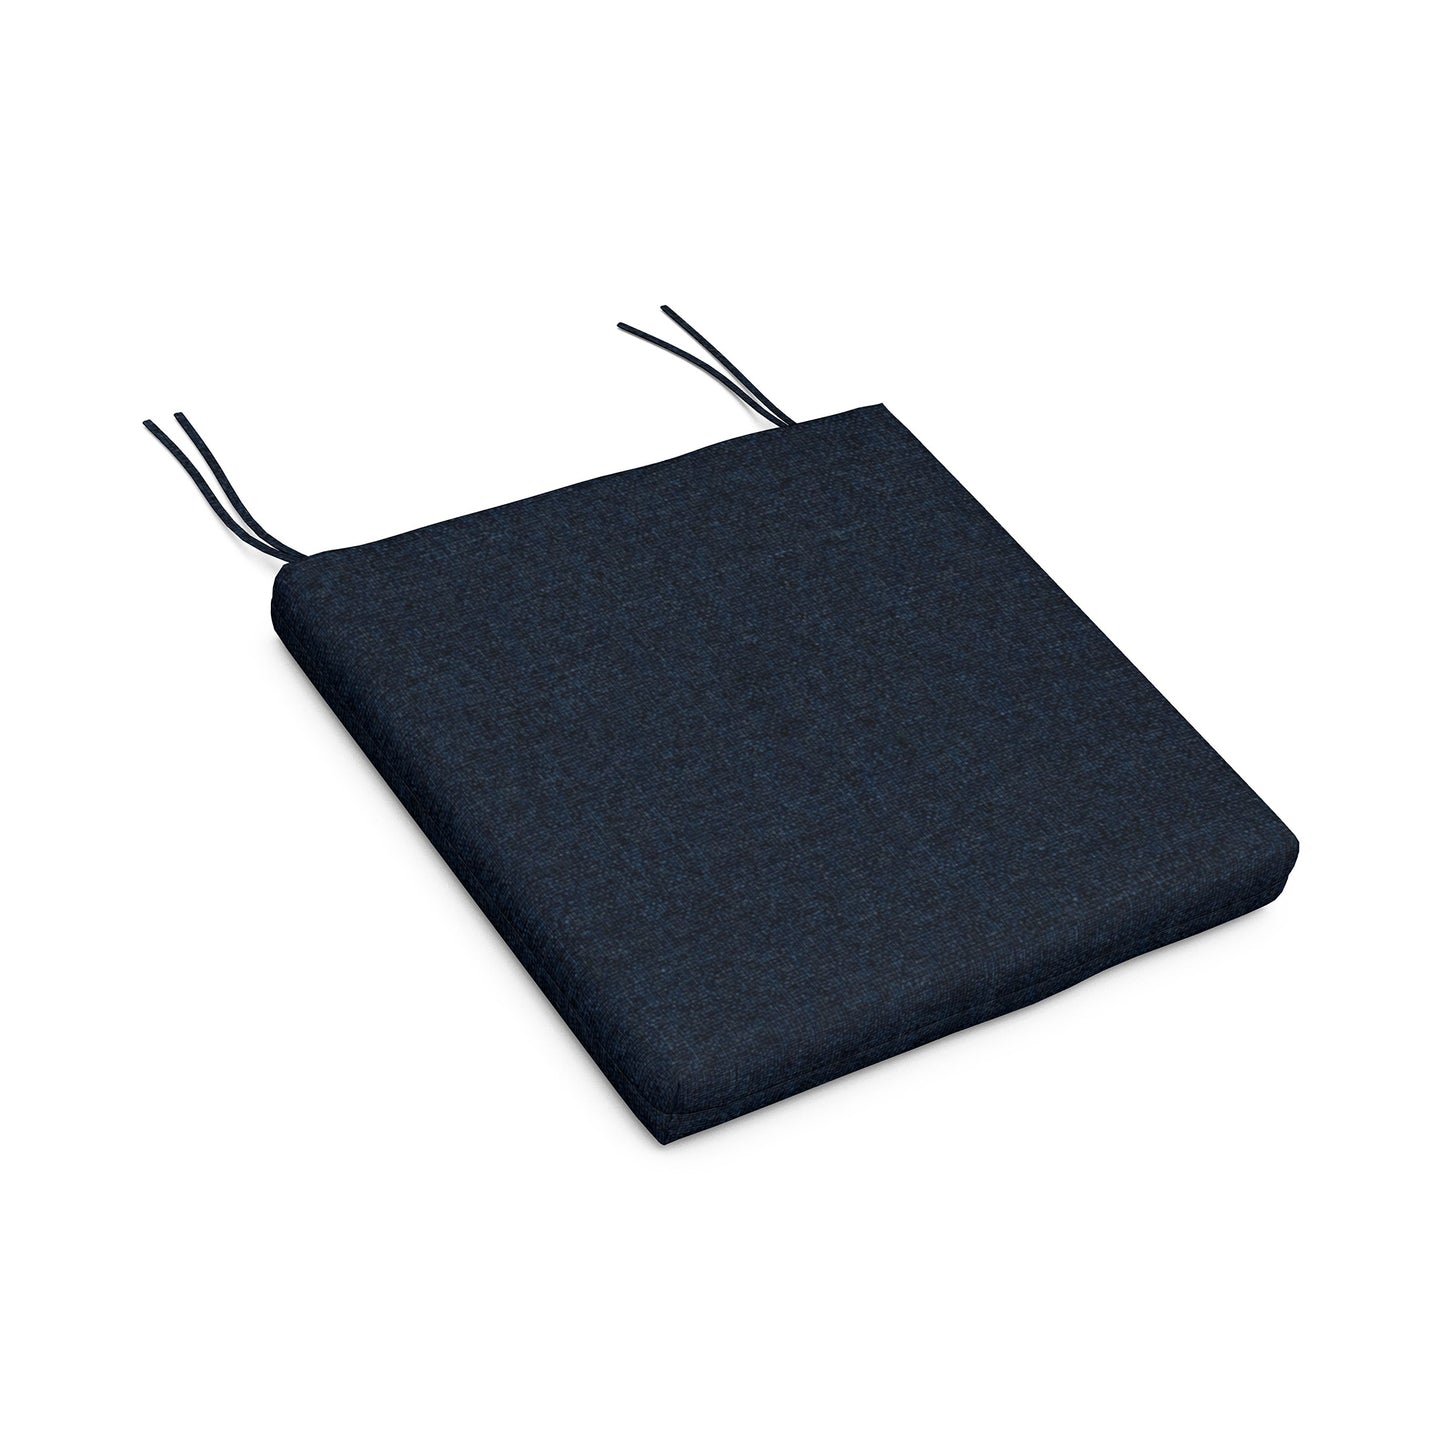 A blue POLYWOOD® XPWS0172 Seat Cushion with two black tie straps on a white background. The cushion appears firm and is designed for use on seating furniture for added comfort.